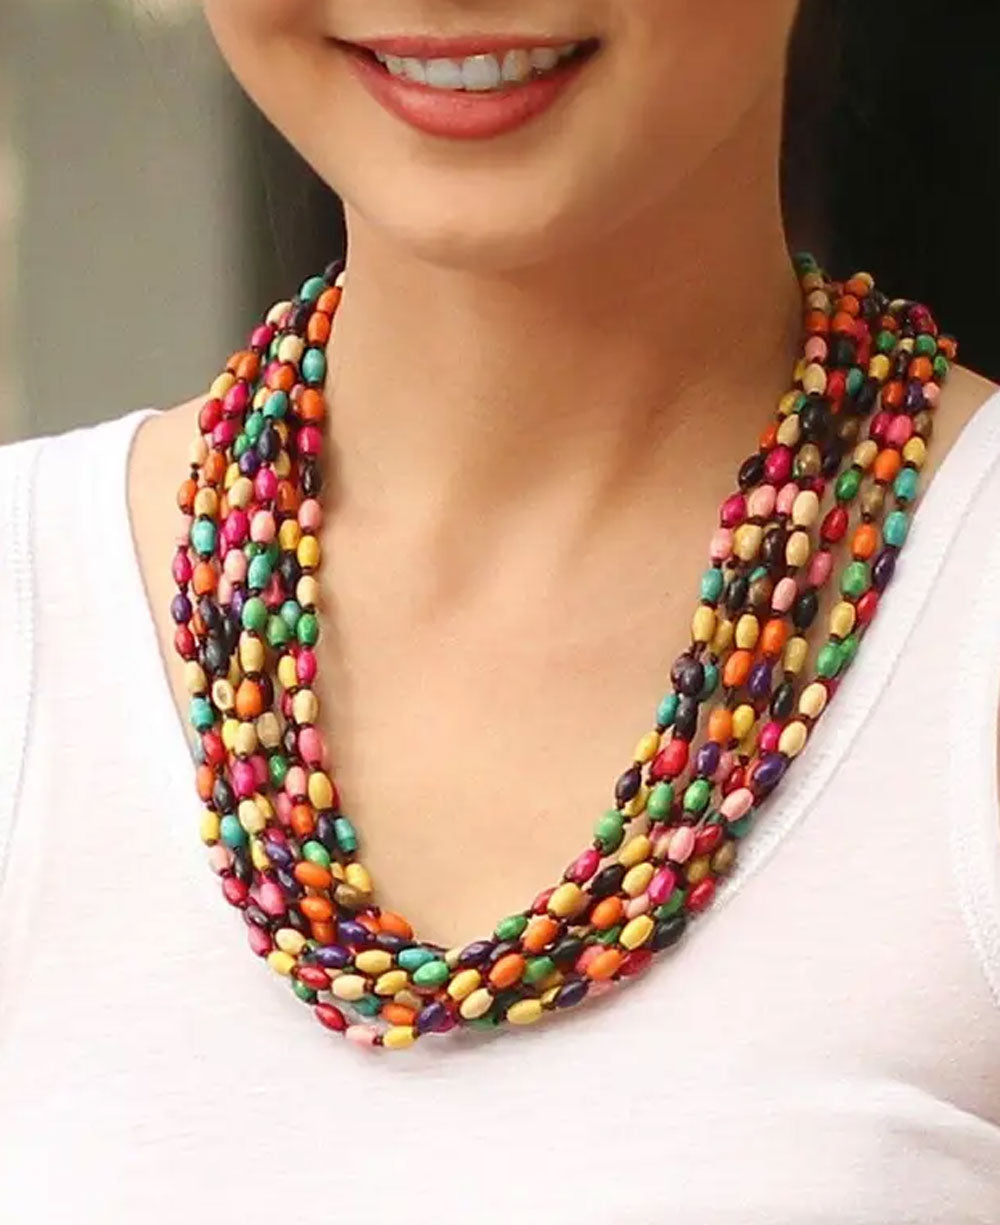 Smiling woman wearing a colorful necklace depicting multistrands